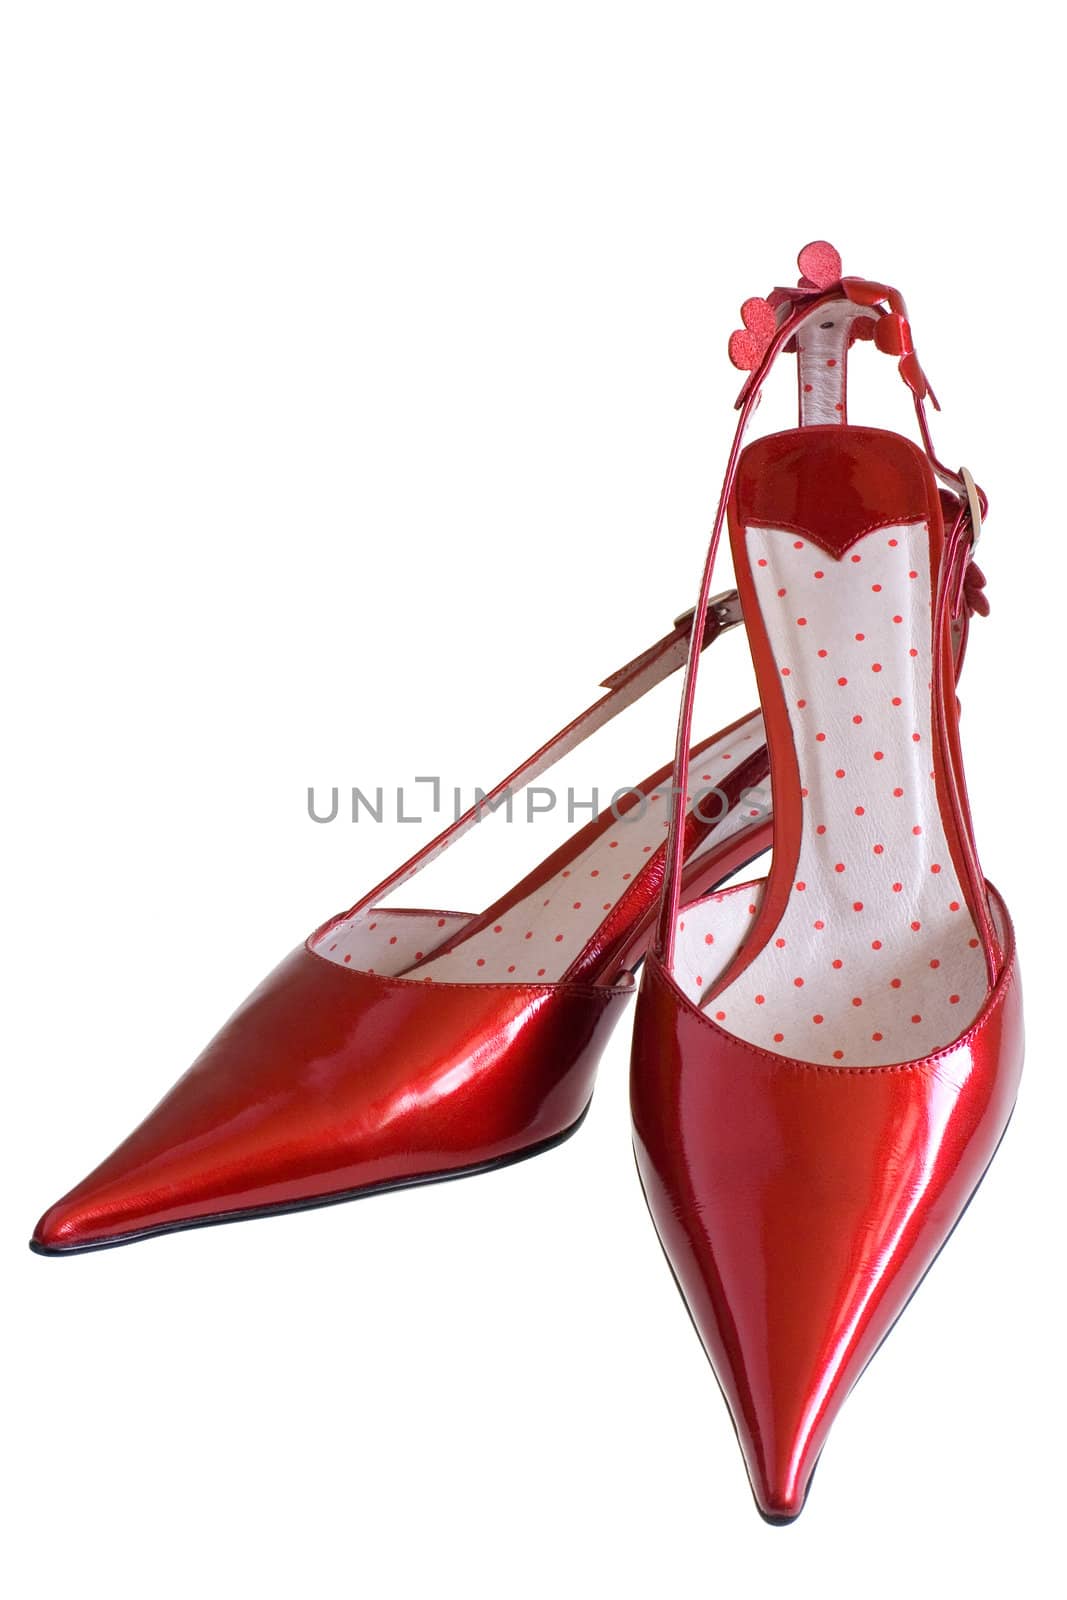 Red patent-leather shoes on a white background